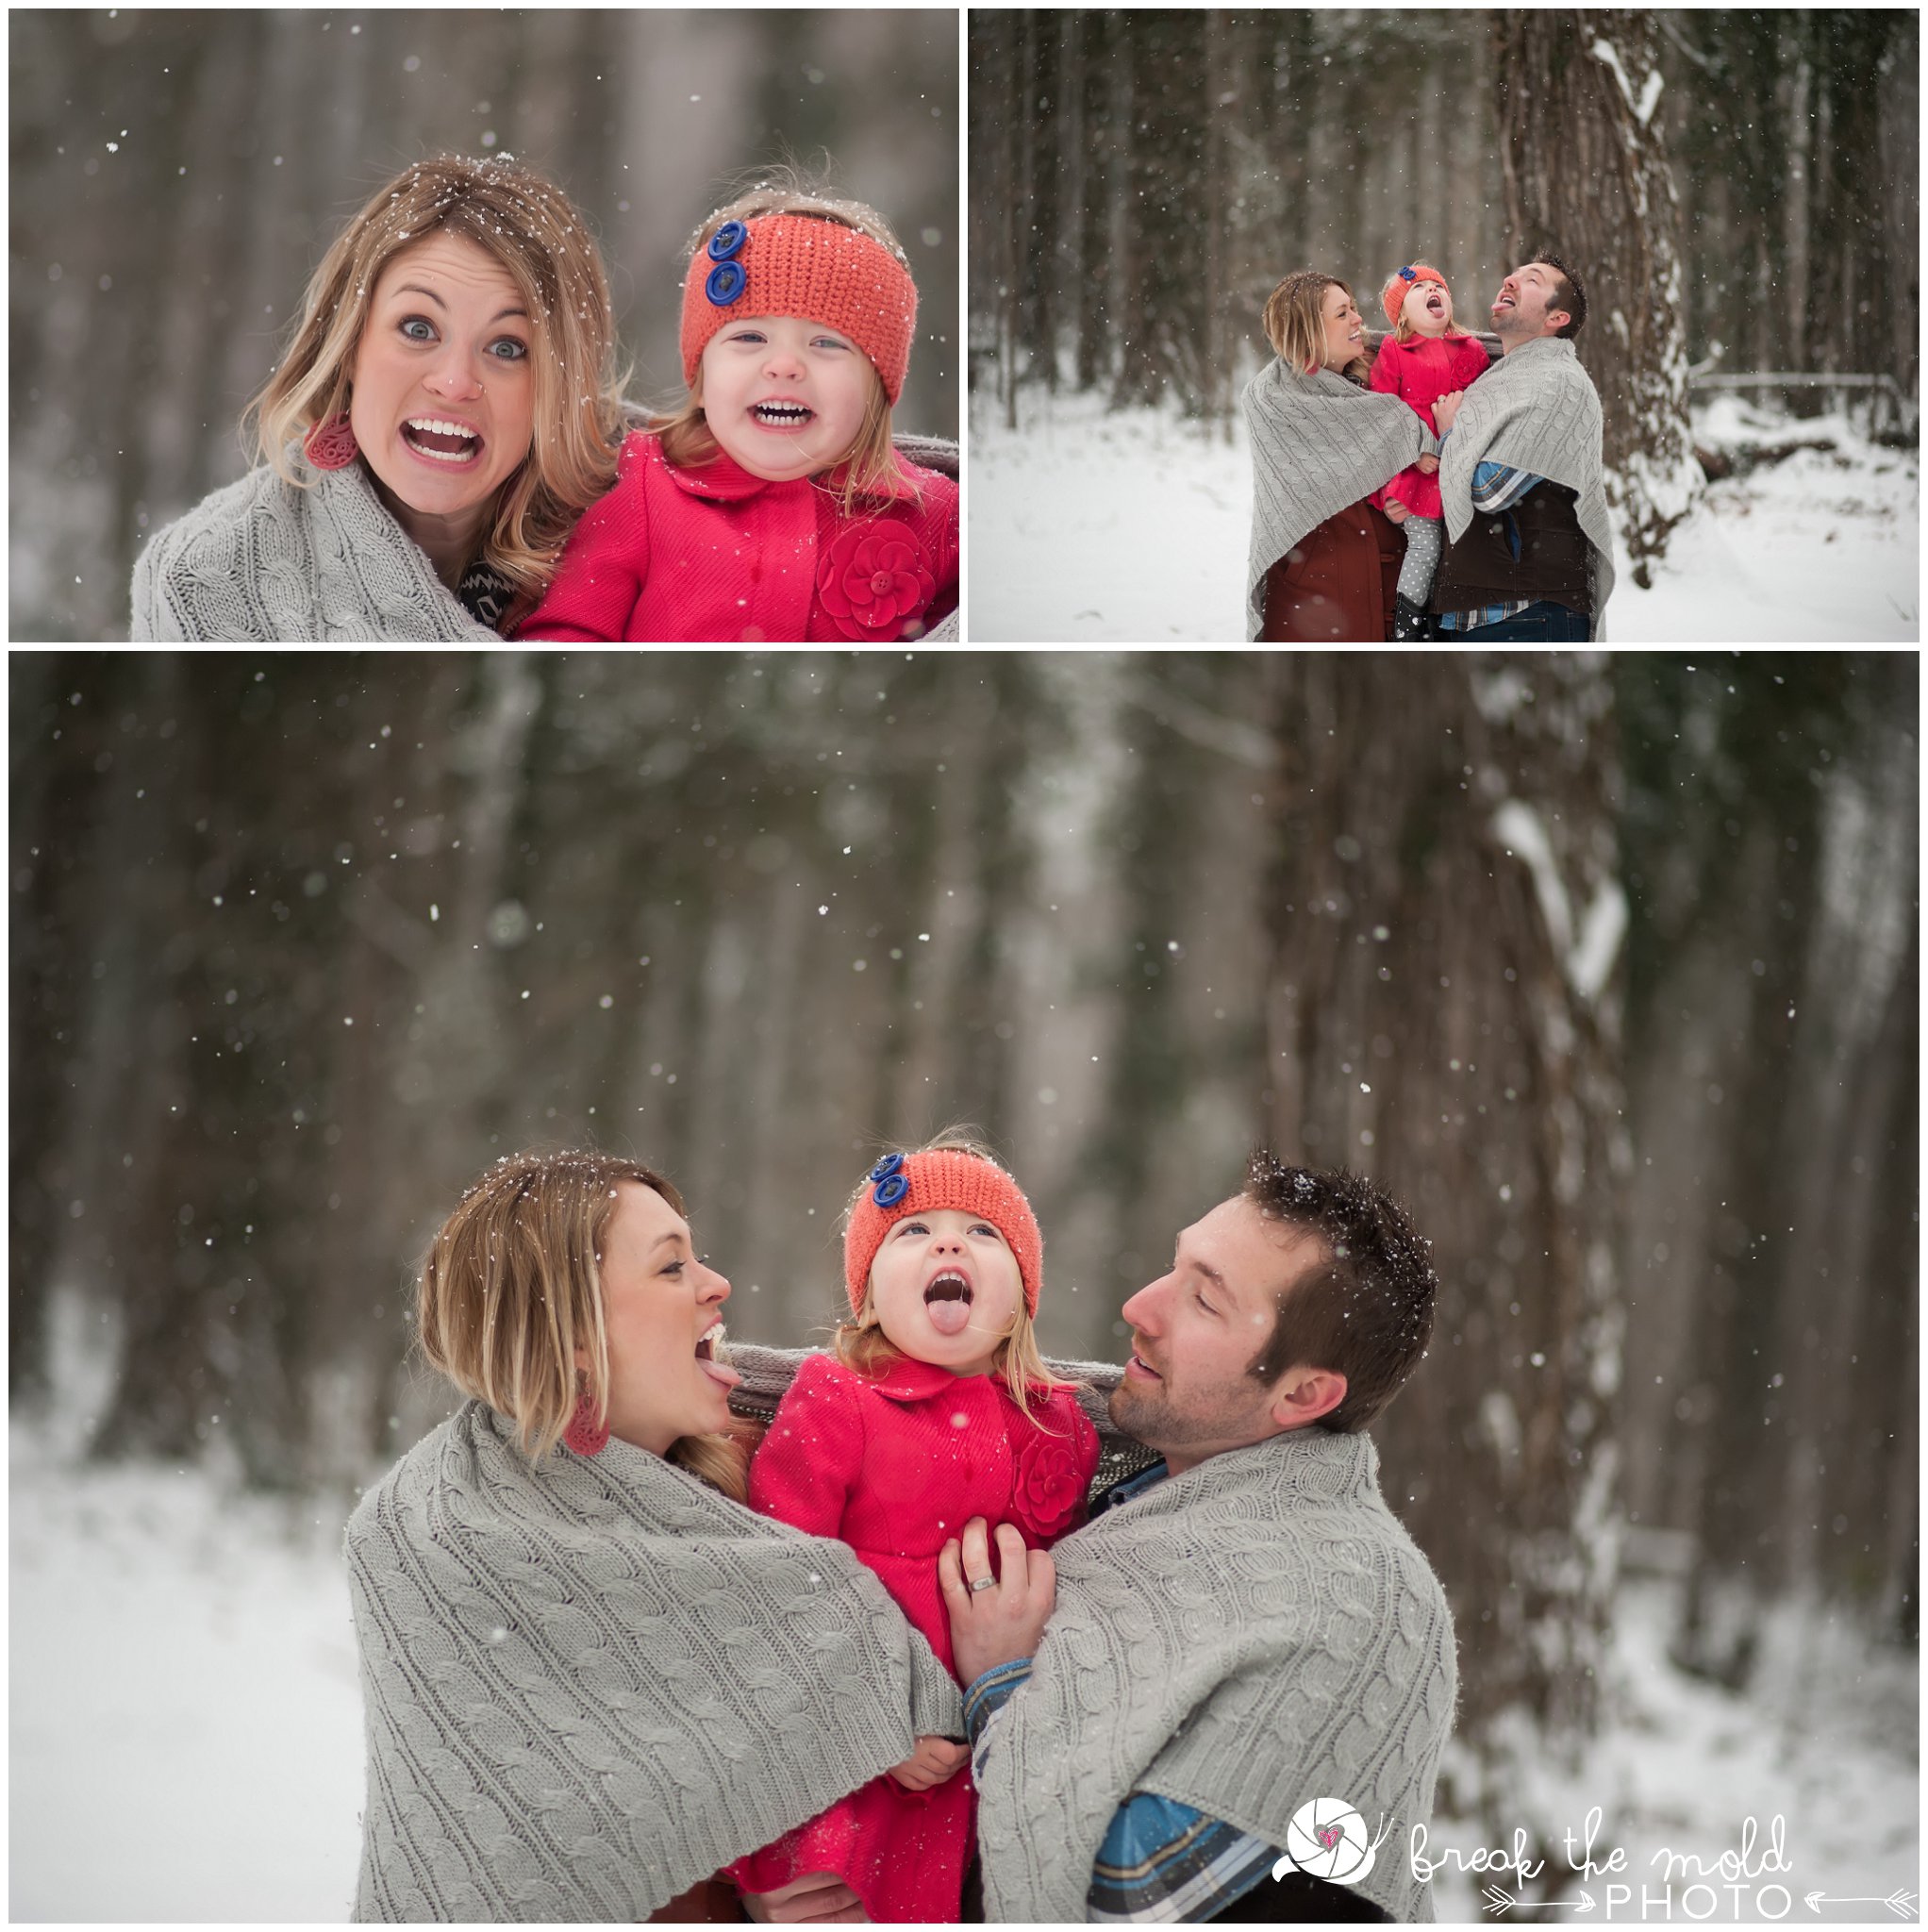 break-the-mold-photo-snowy-day-engagement-photos-knoxville-tn-tennessee-snow-day-pictures-winter-outdoor-unique-family_1522.jpg